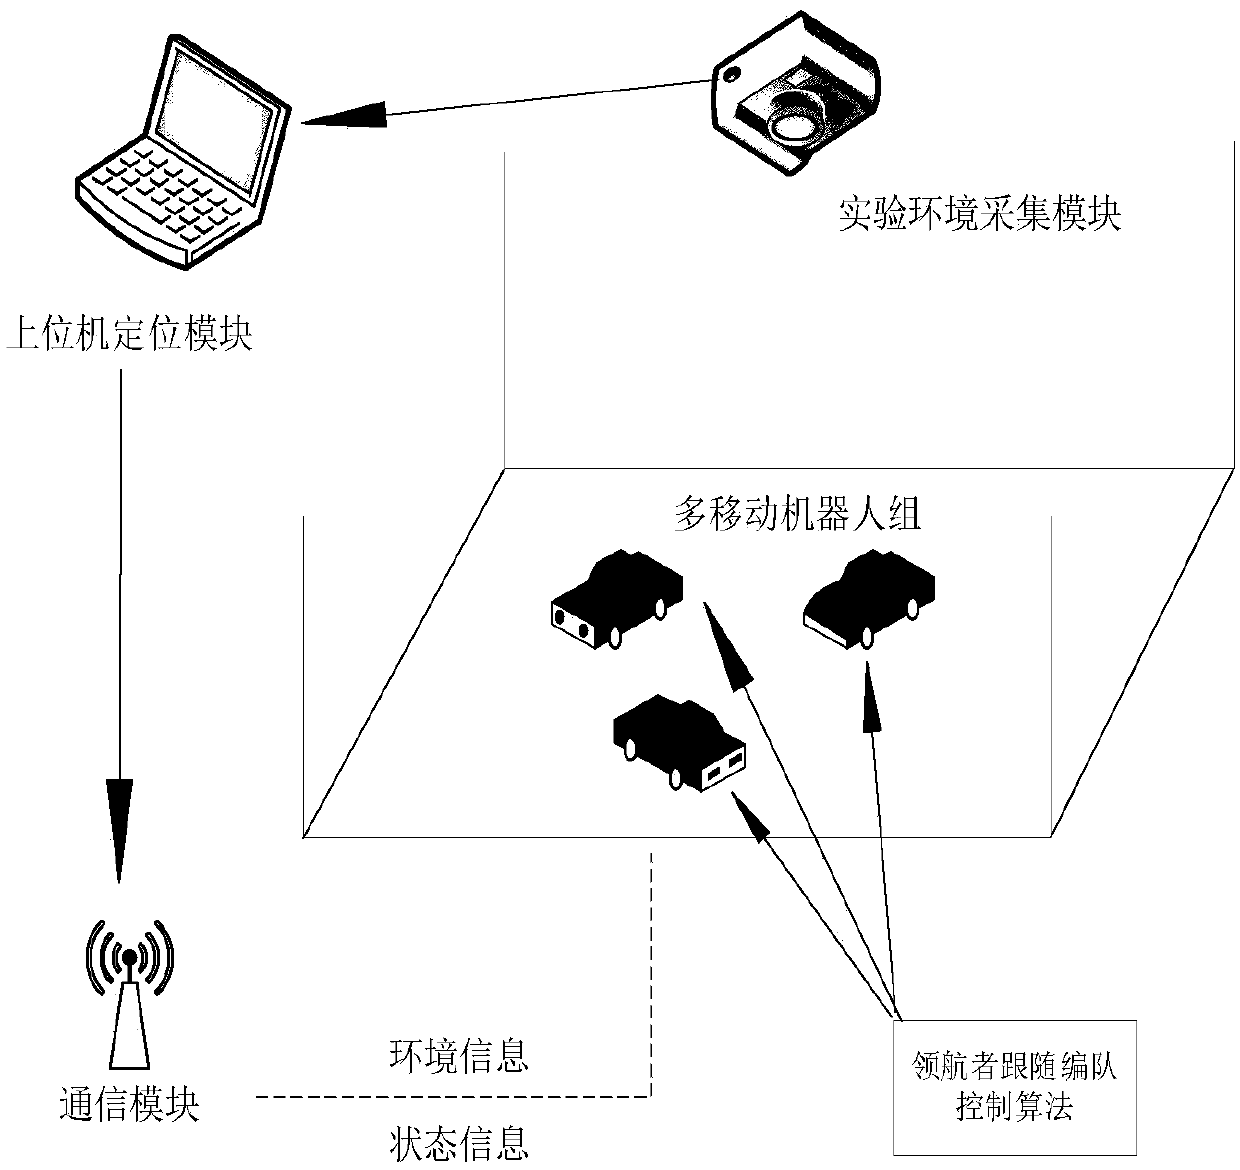 Multi-mobile robot control system based on following pilot formation